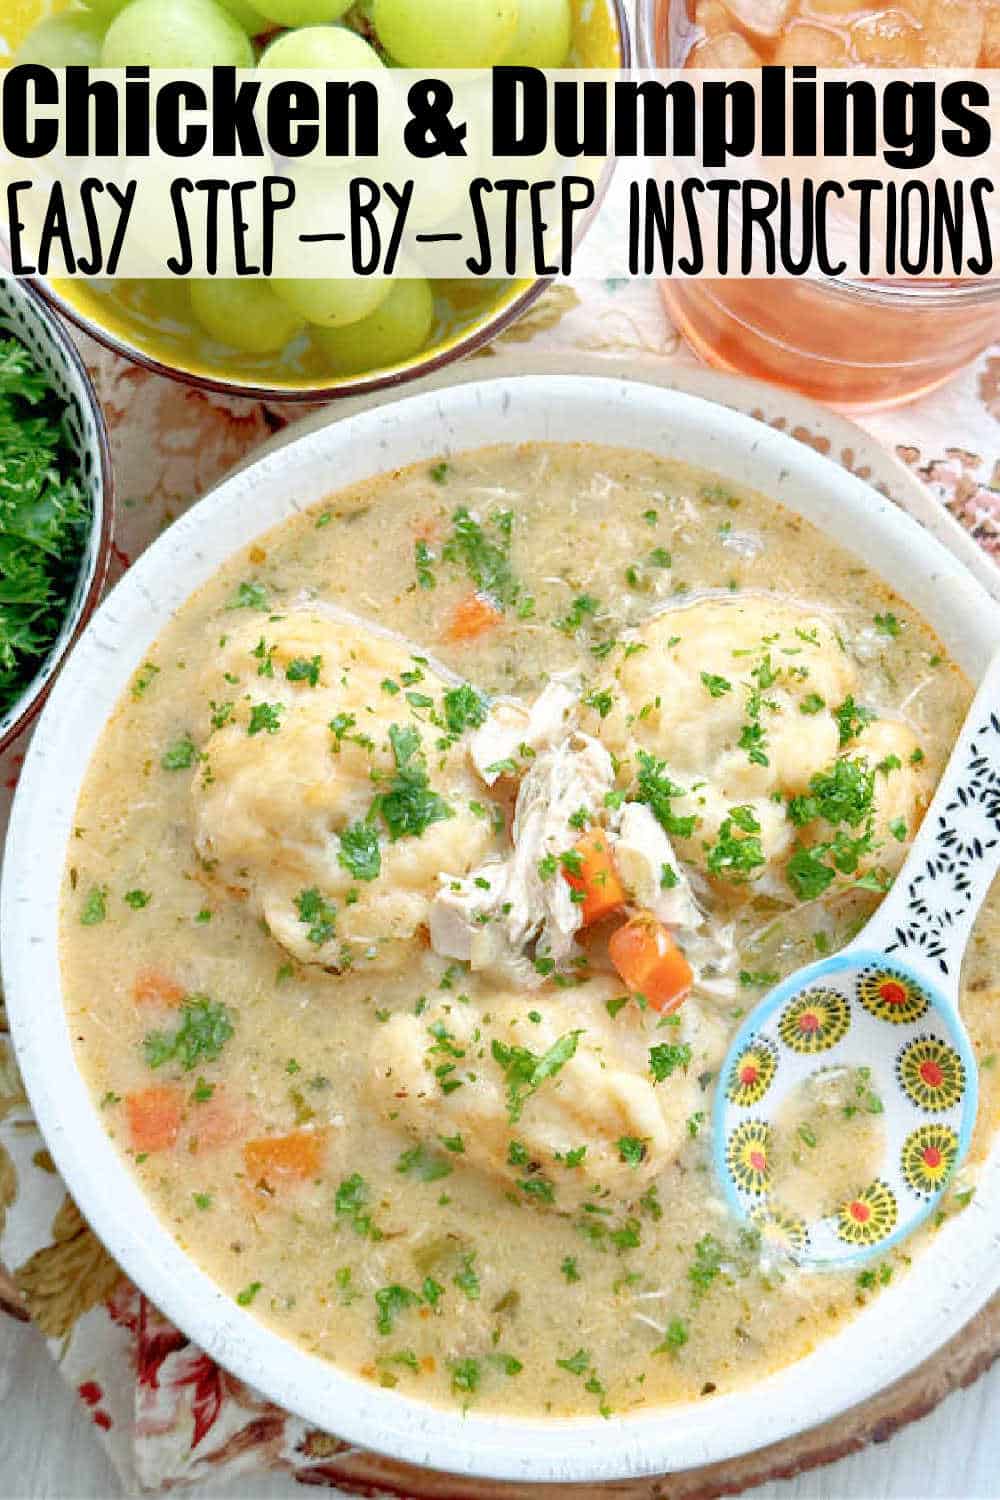 An easy chicken and dumplings recipe made with rotisserie chicken and homemade drop biscuit dumplings.